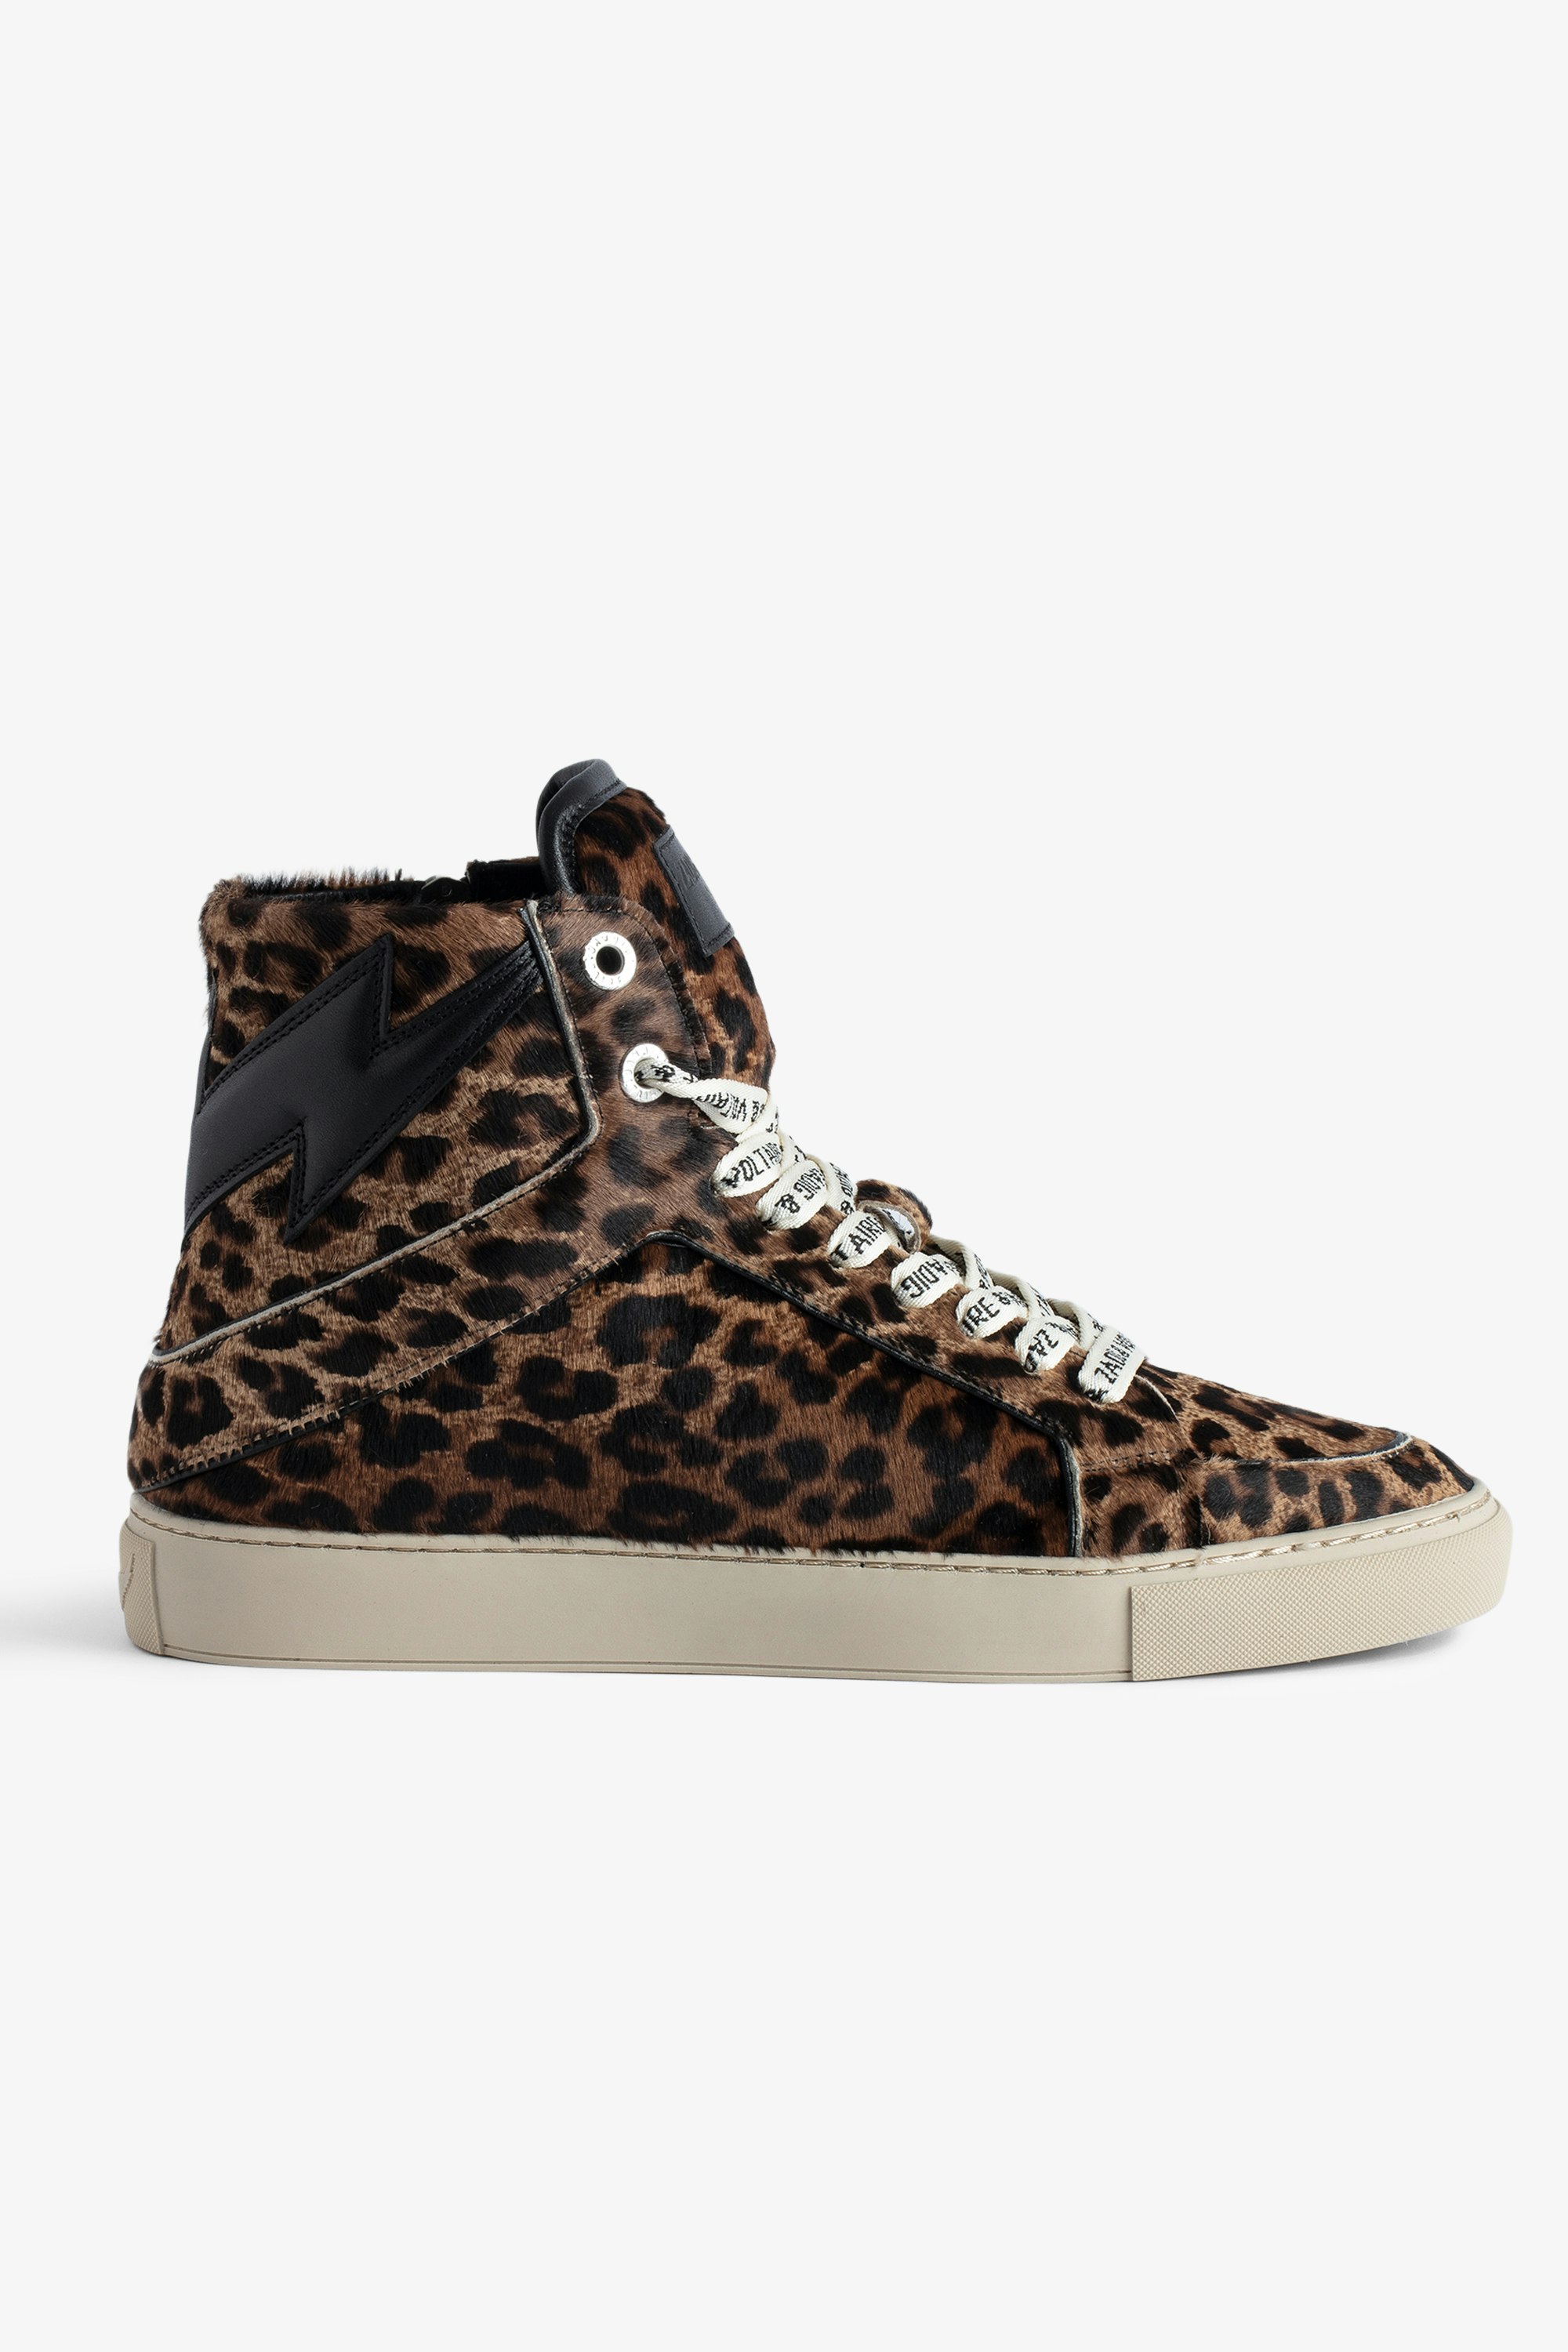 ZV1747 High Flash High-Top Trainers Women’s leopard-effect brown leather high-top trainers with lightning bolt panels.